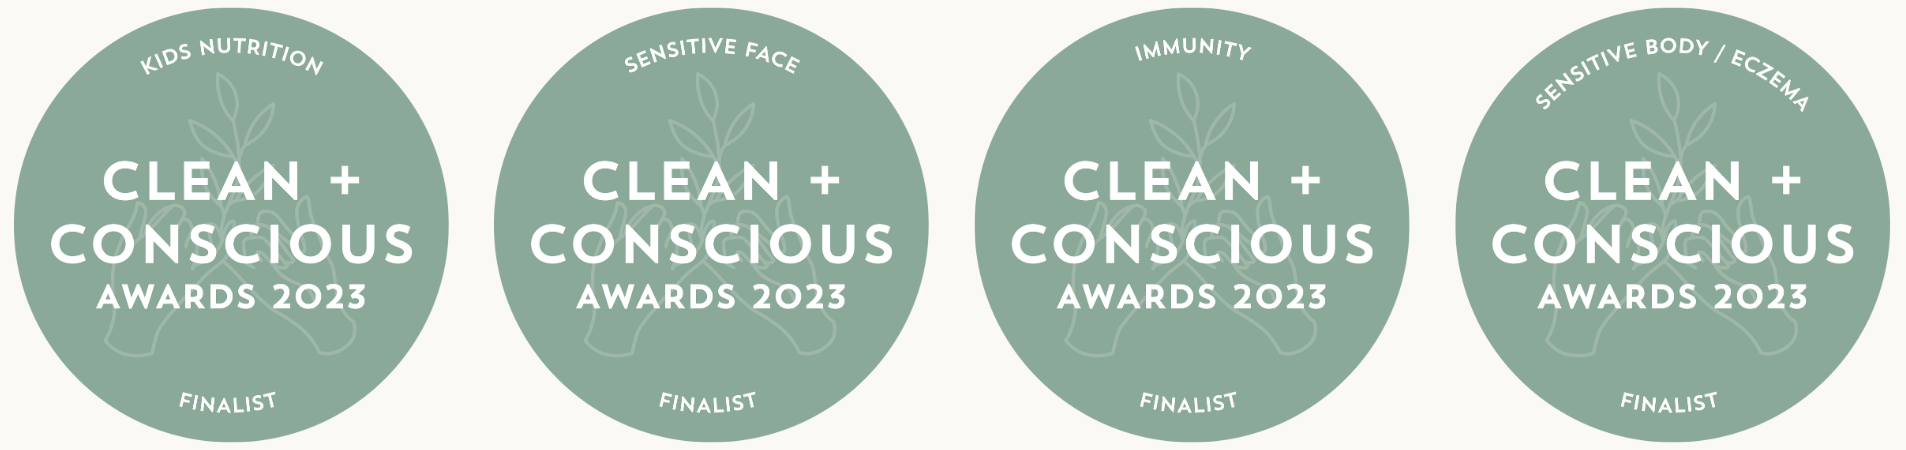 Announcing the finalists of the Clean + Conscious Awards 2023